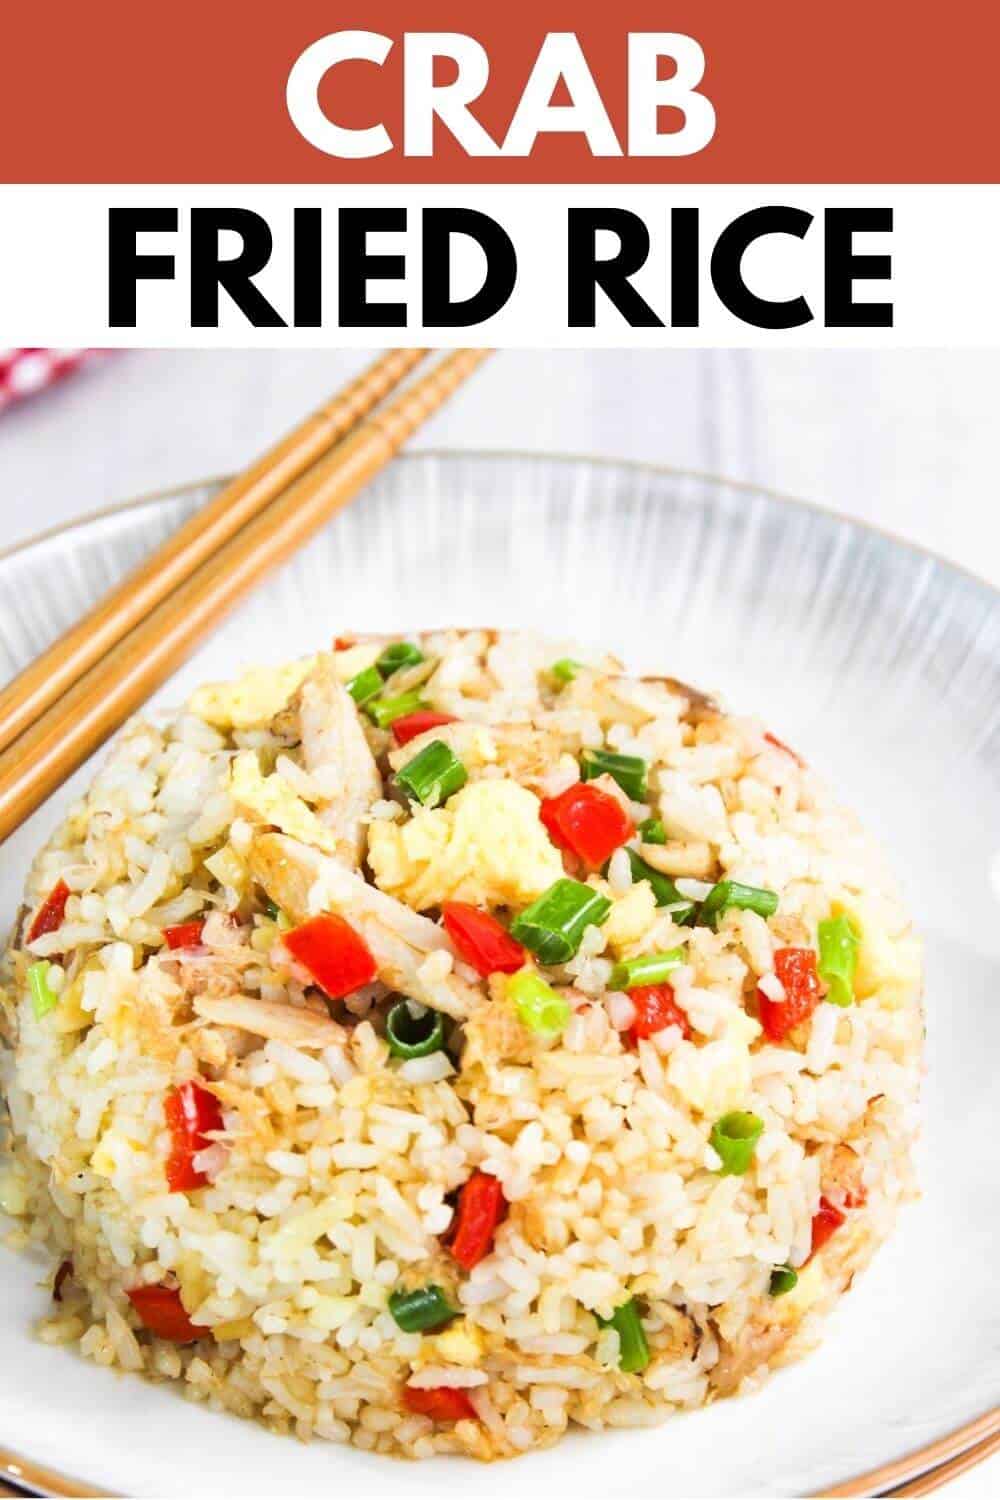 Crab fried rice on a plate with chopsticks.